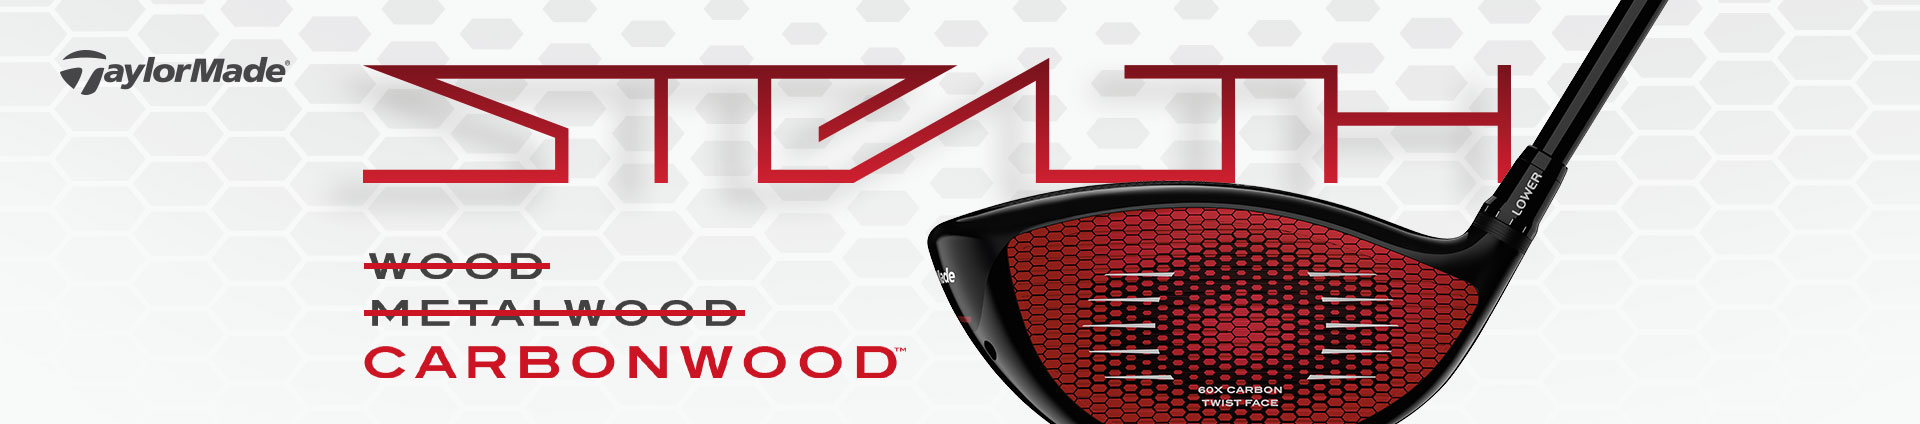 TaylorMade Stealth Carbon Woods